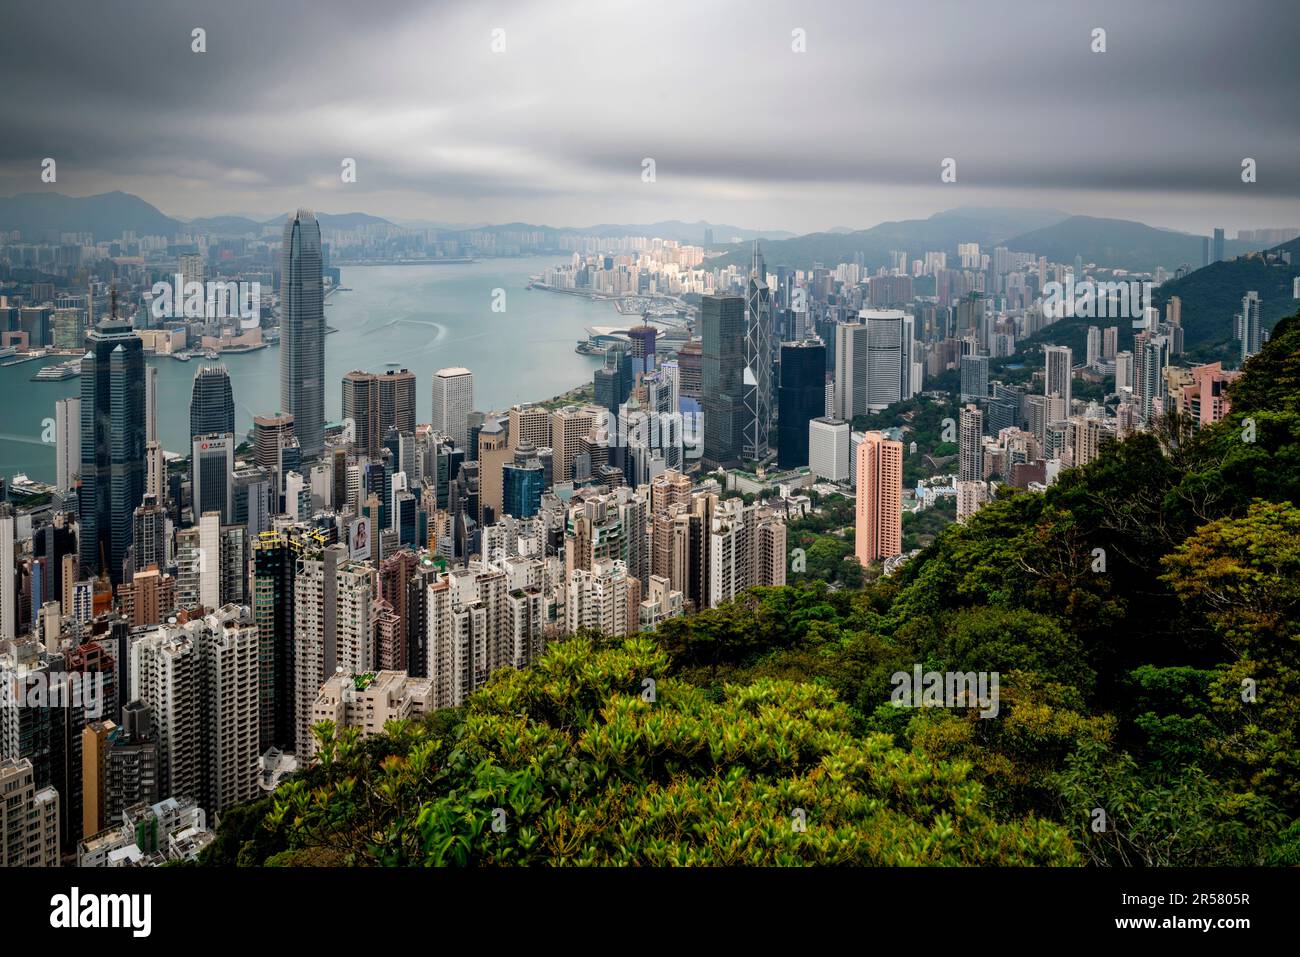 An Elevated View of The Hong Kong Skyline Taken From The Peak, Hong Kong, China. Stock Photo